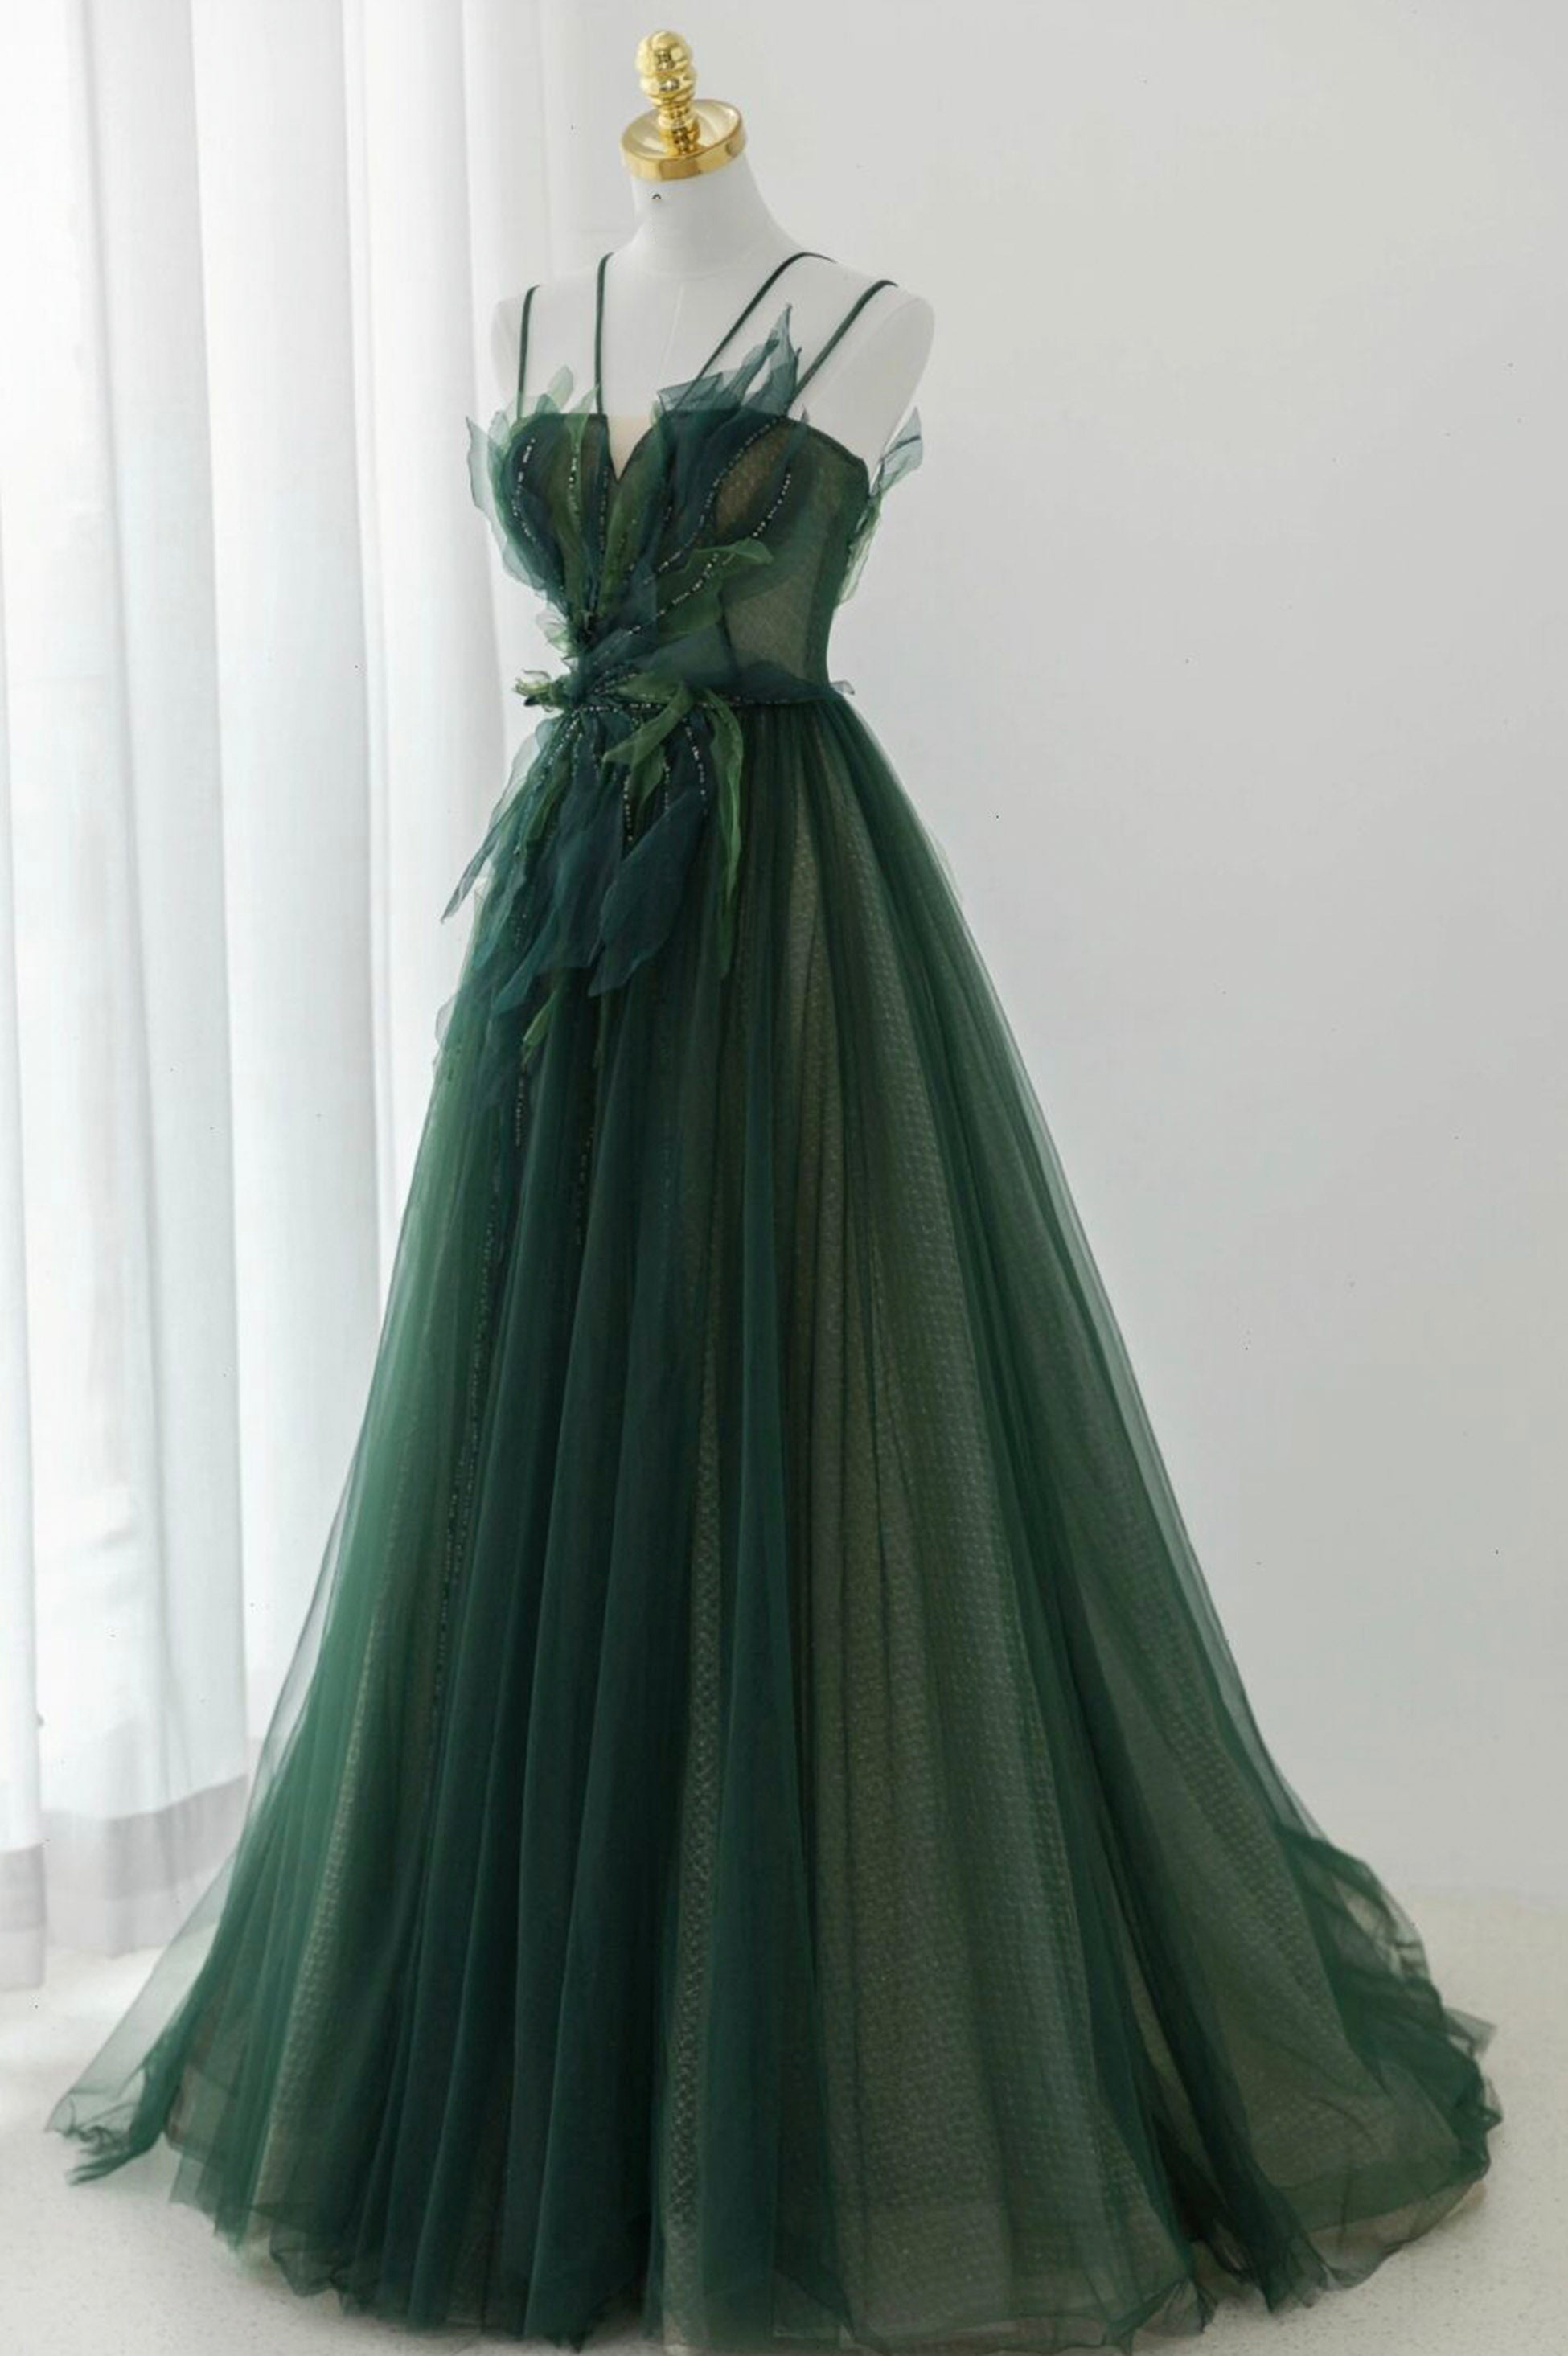 Green Tulle Long A-Line Prom Dress Outfits For Girls, Spaghetti Straps Evening Dress